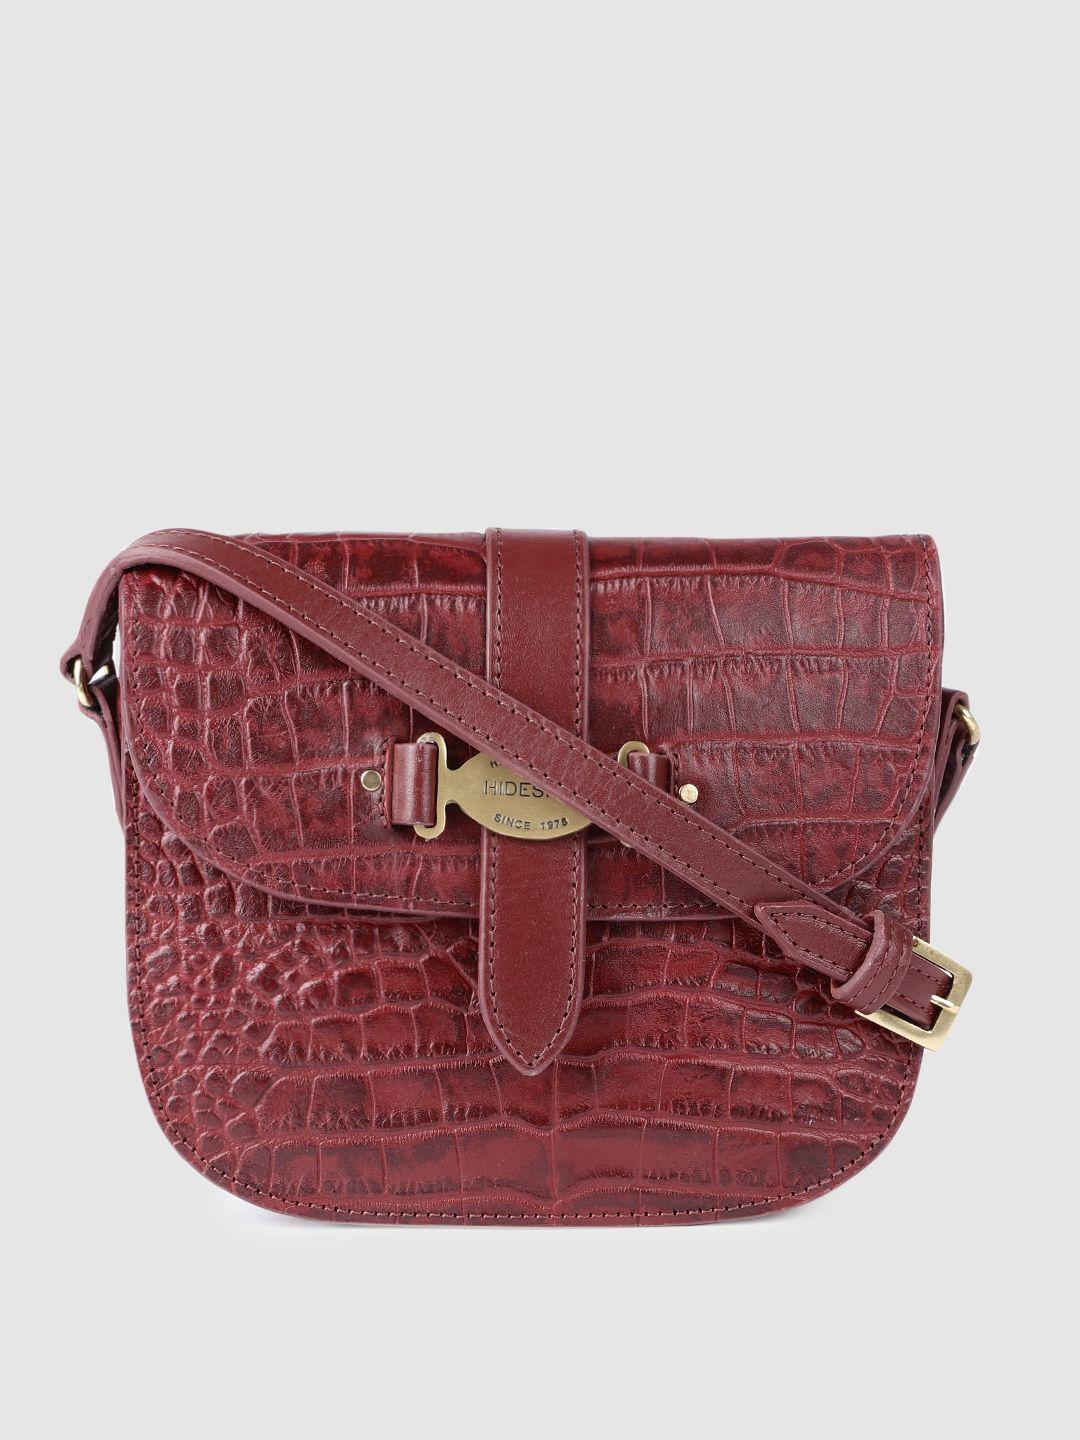 hidesign maroon textured leather structured sling bag